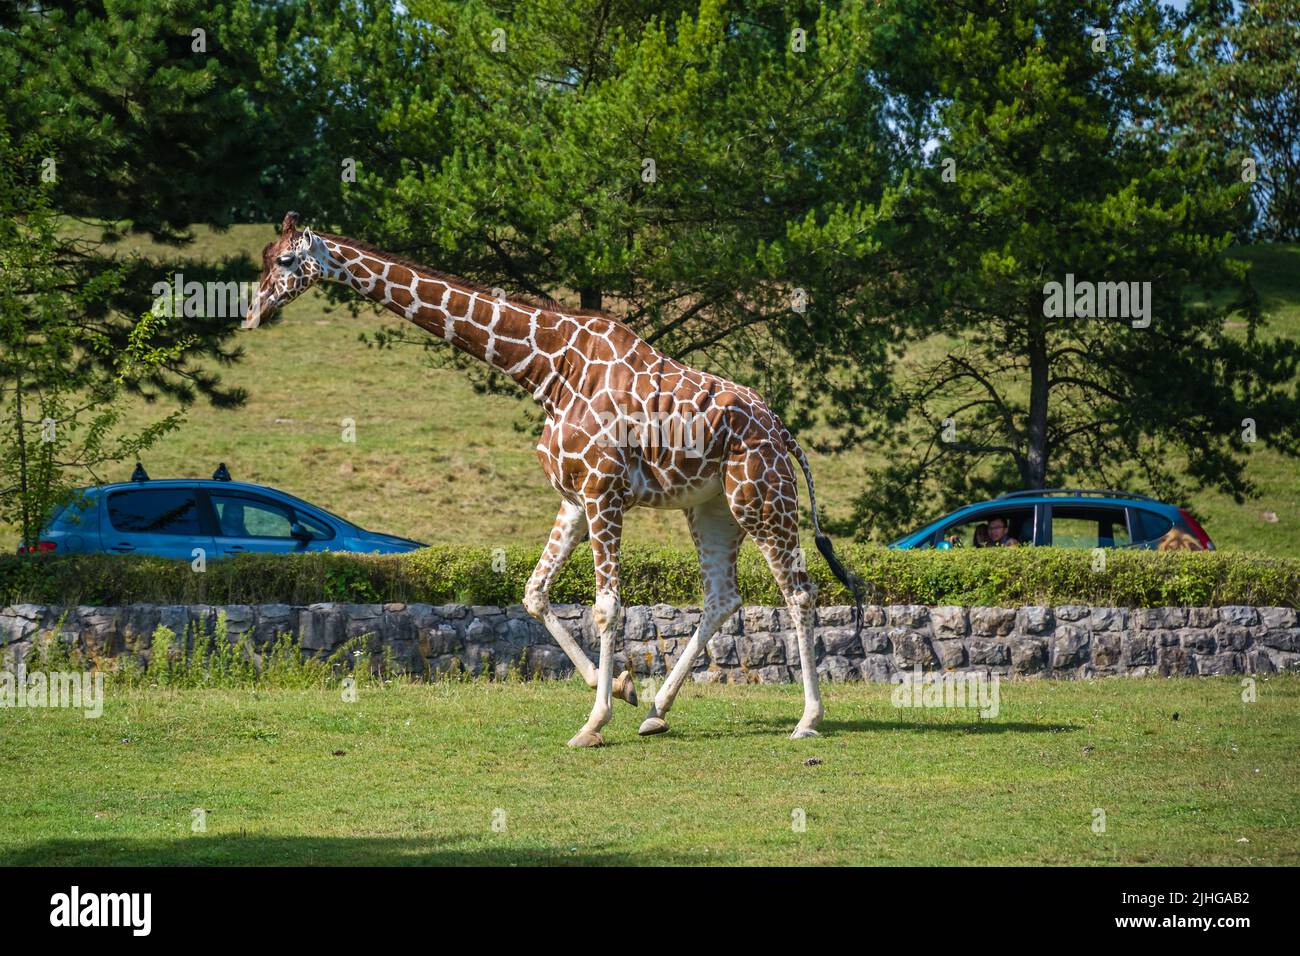 Safari Park Dvůr Králové, Czech Republic - August 2020 : People sitting in cars on a zoo safari tour watching giraffe in its enclosure in summer Stock Photo